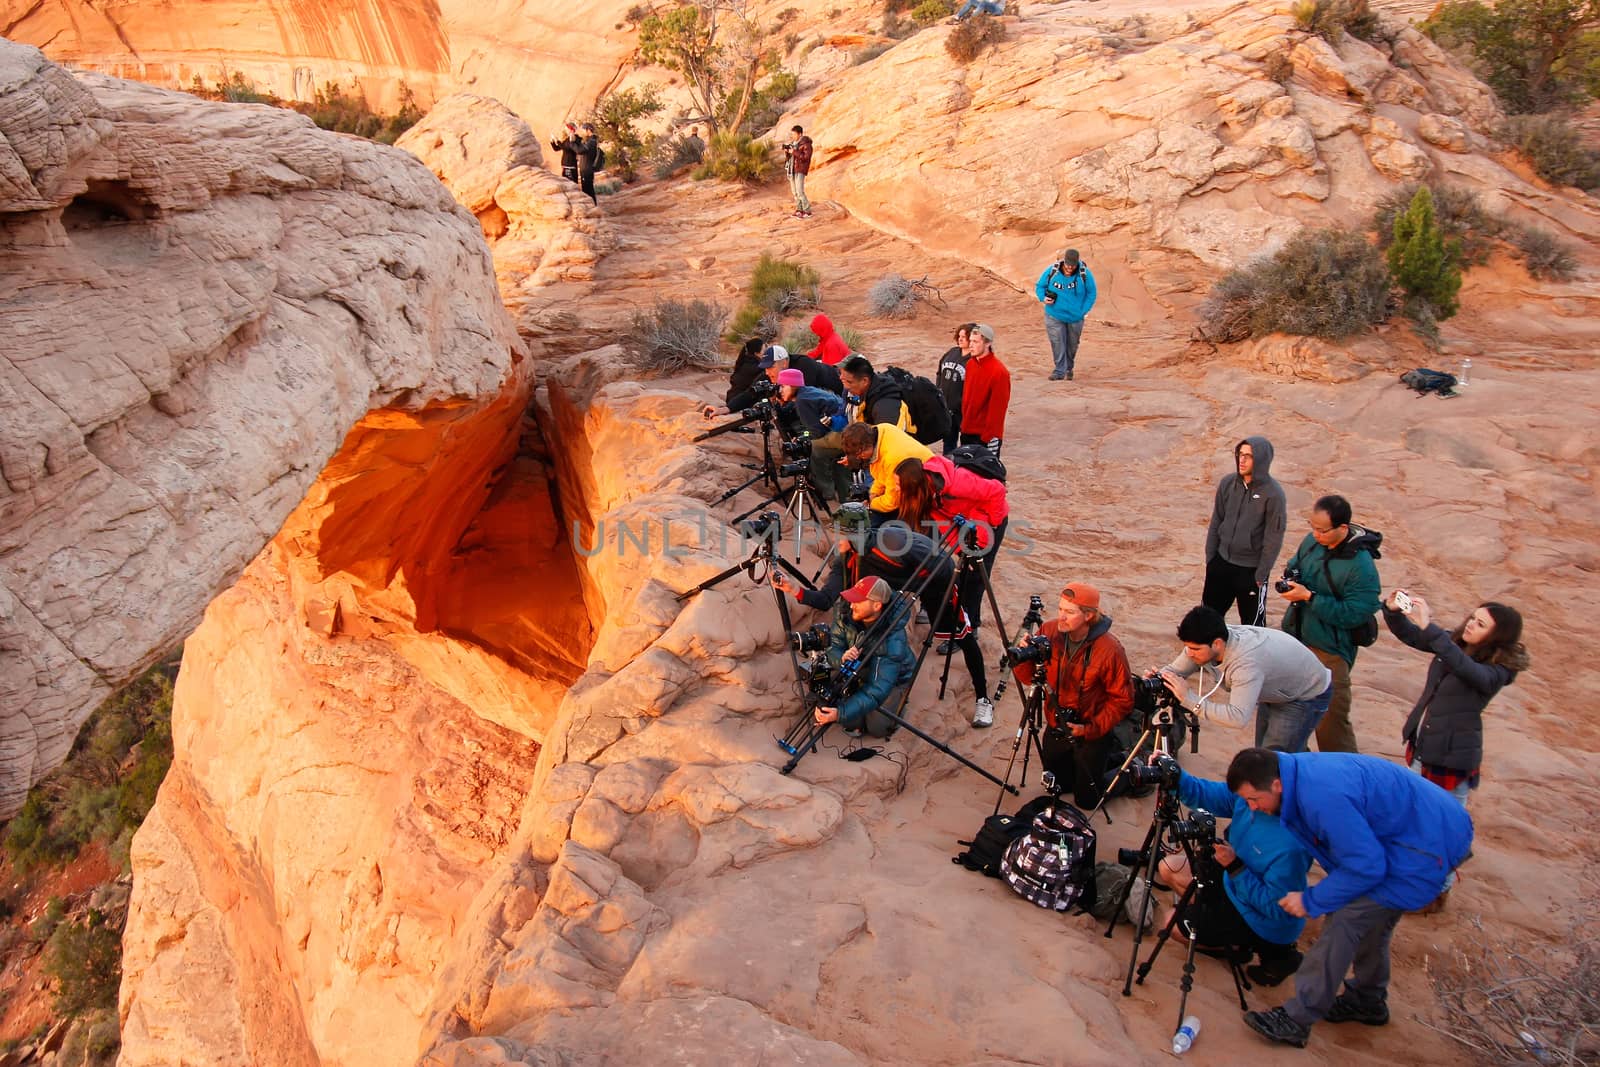 Photographers and tourists watching sunrise at  Mesa Arch, Canyonlands National Park, Utah